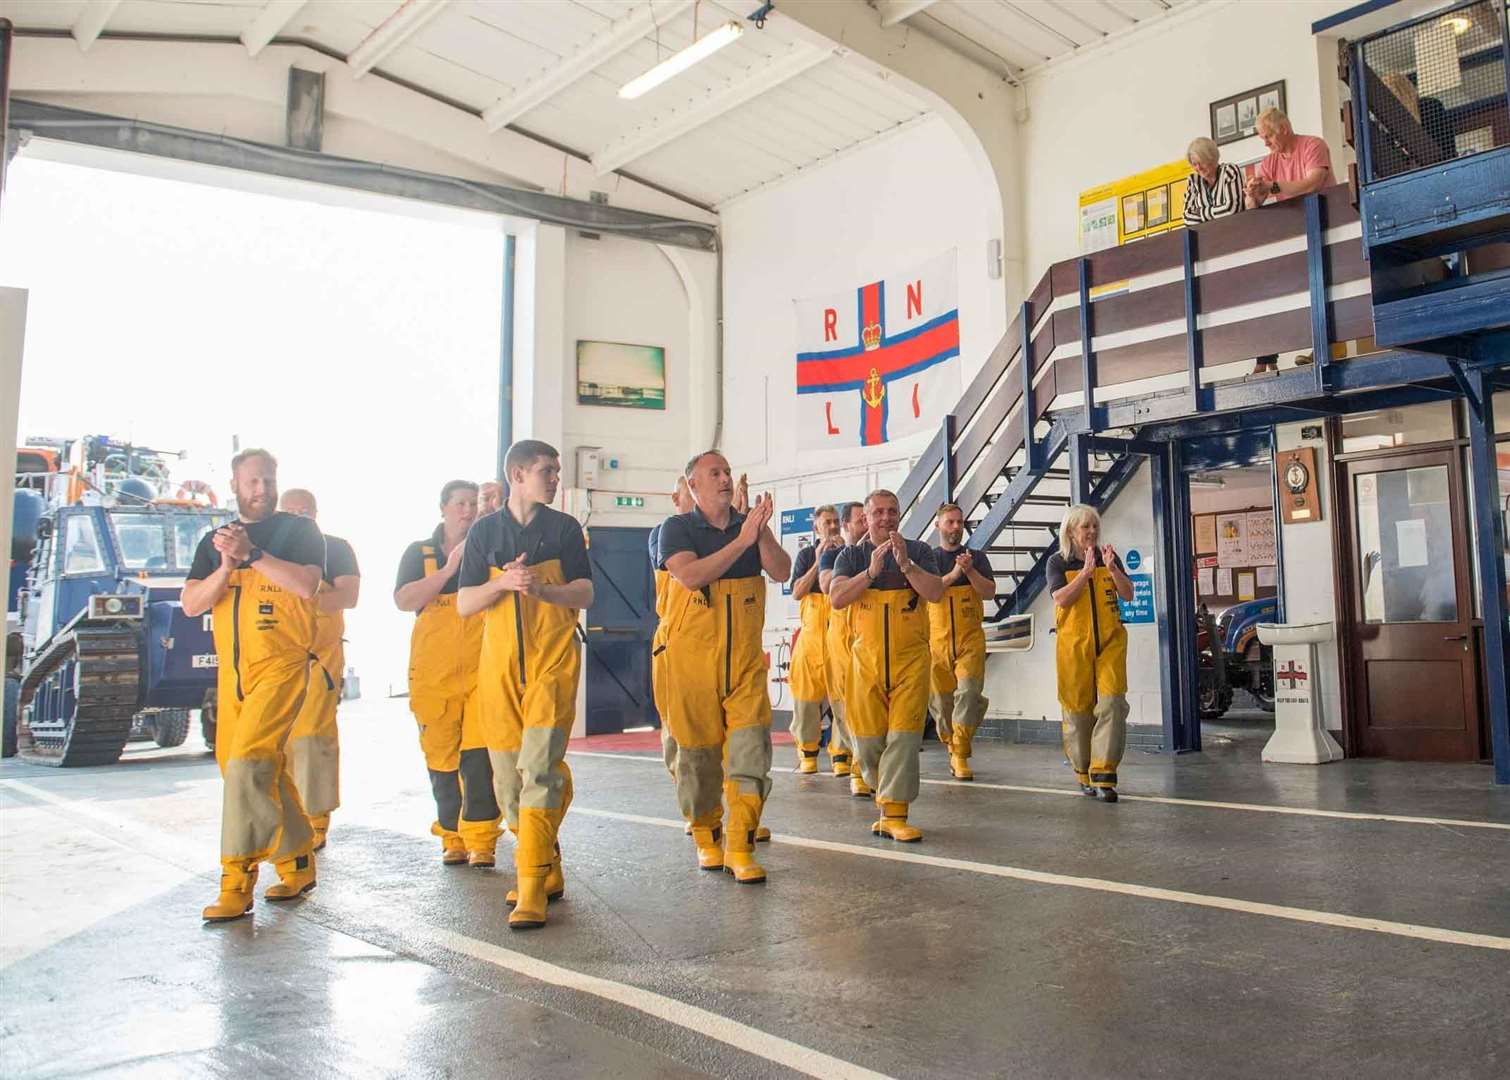 Margate's lifeboat crew perform for the camera (3233375)